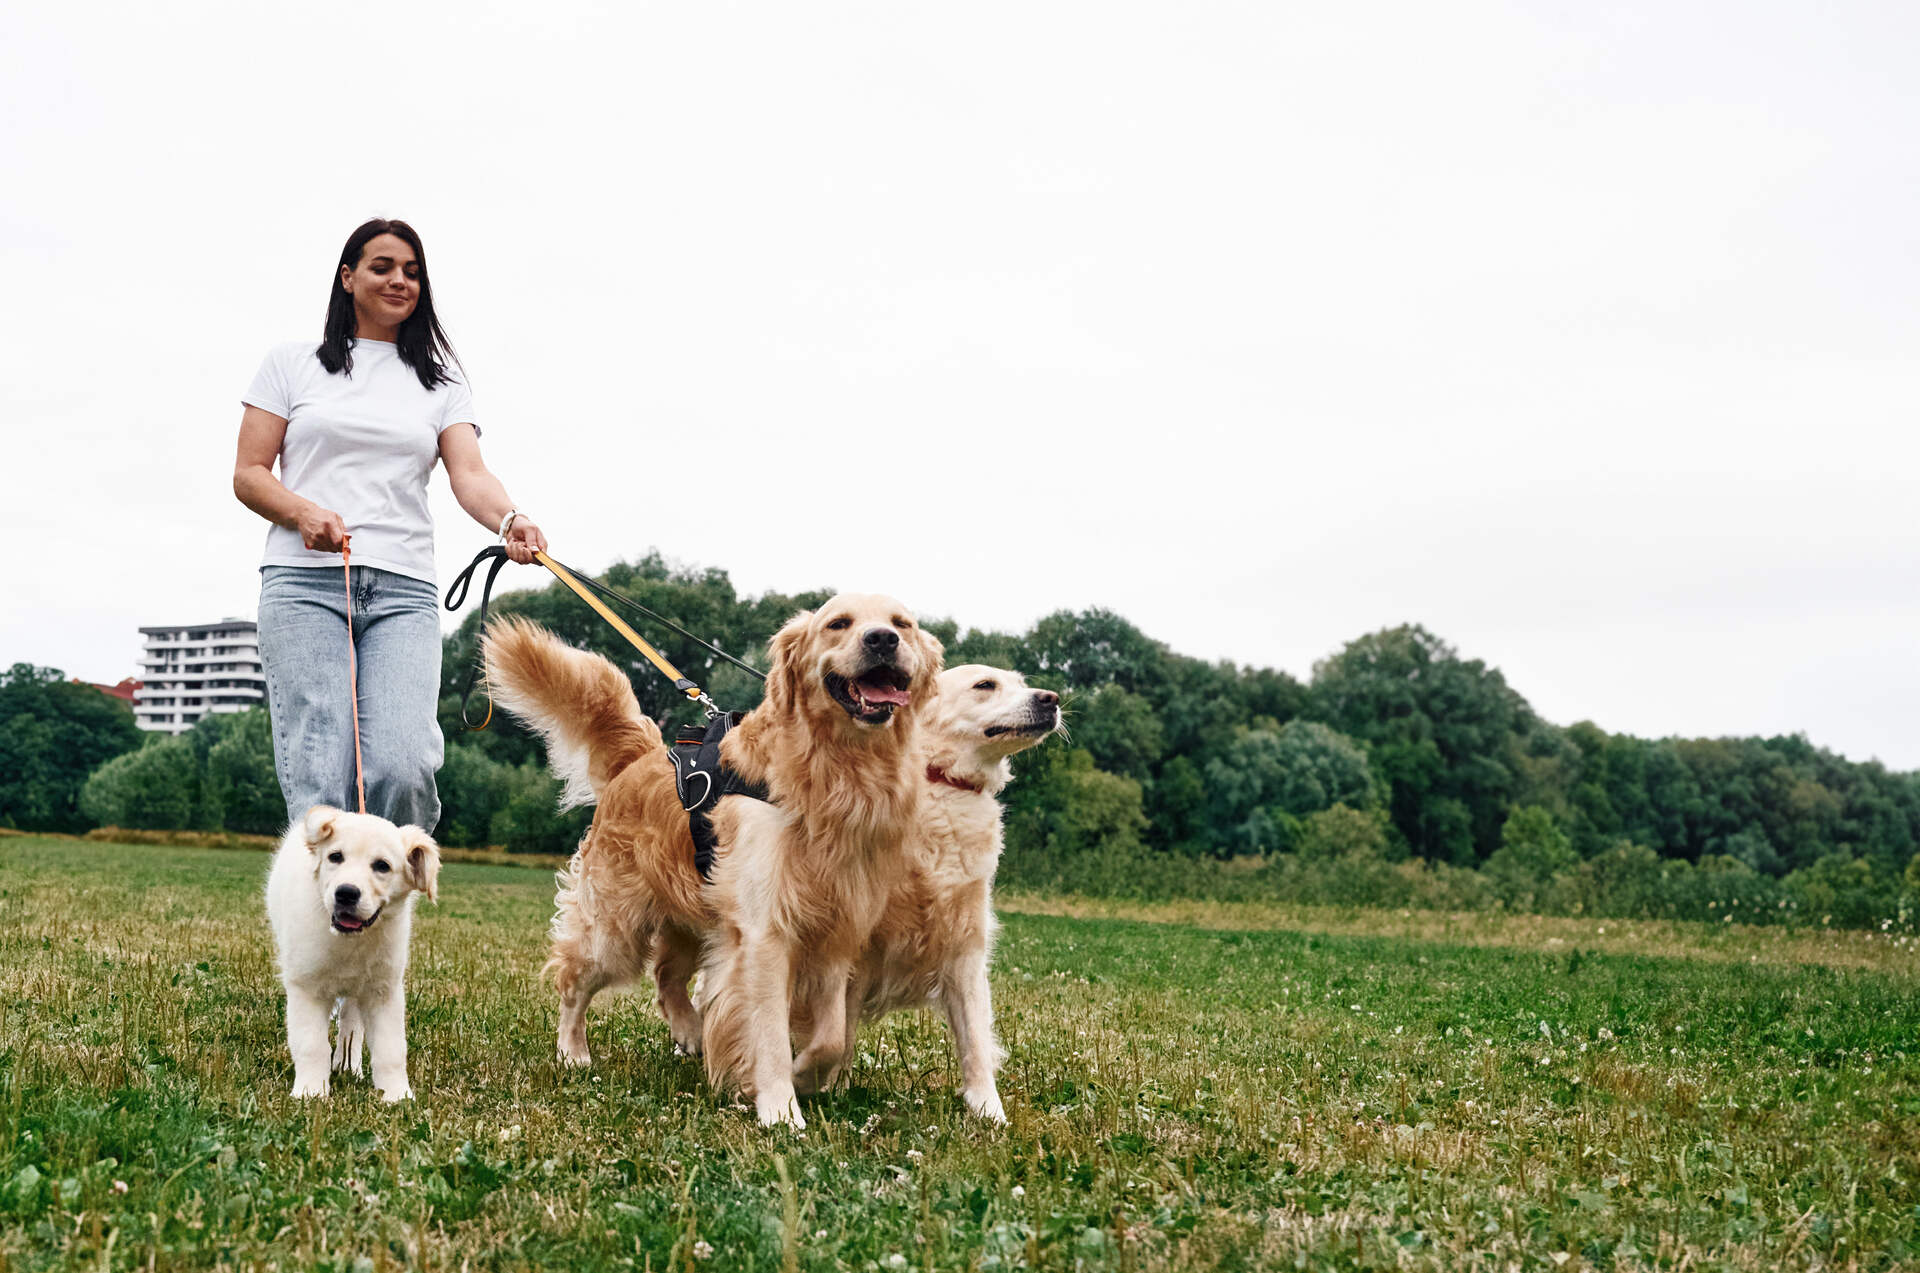 A woman walking three dogs on a leash outdoors